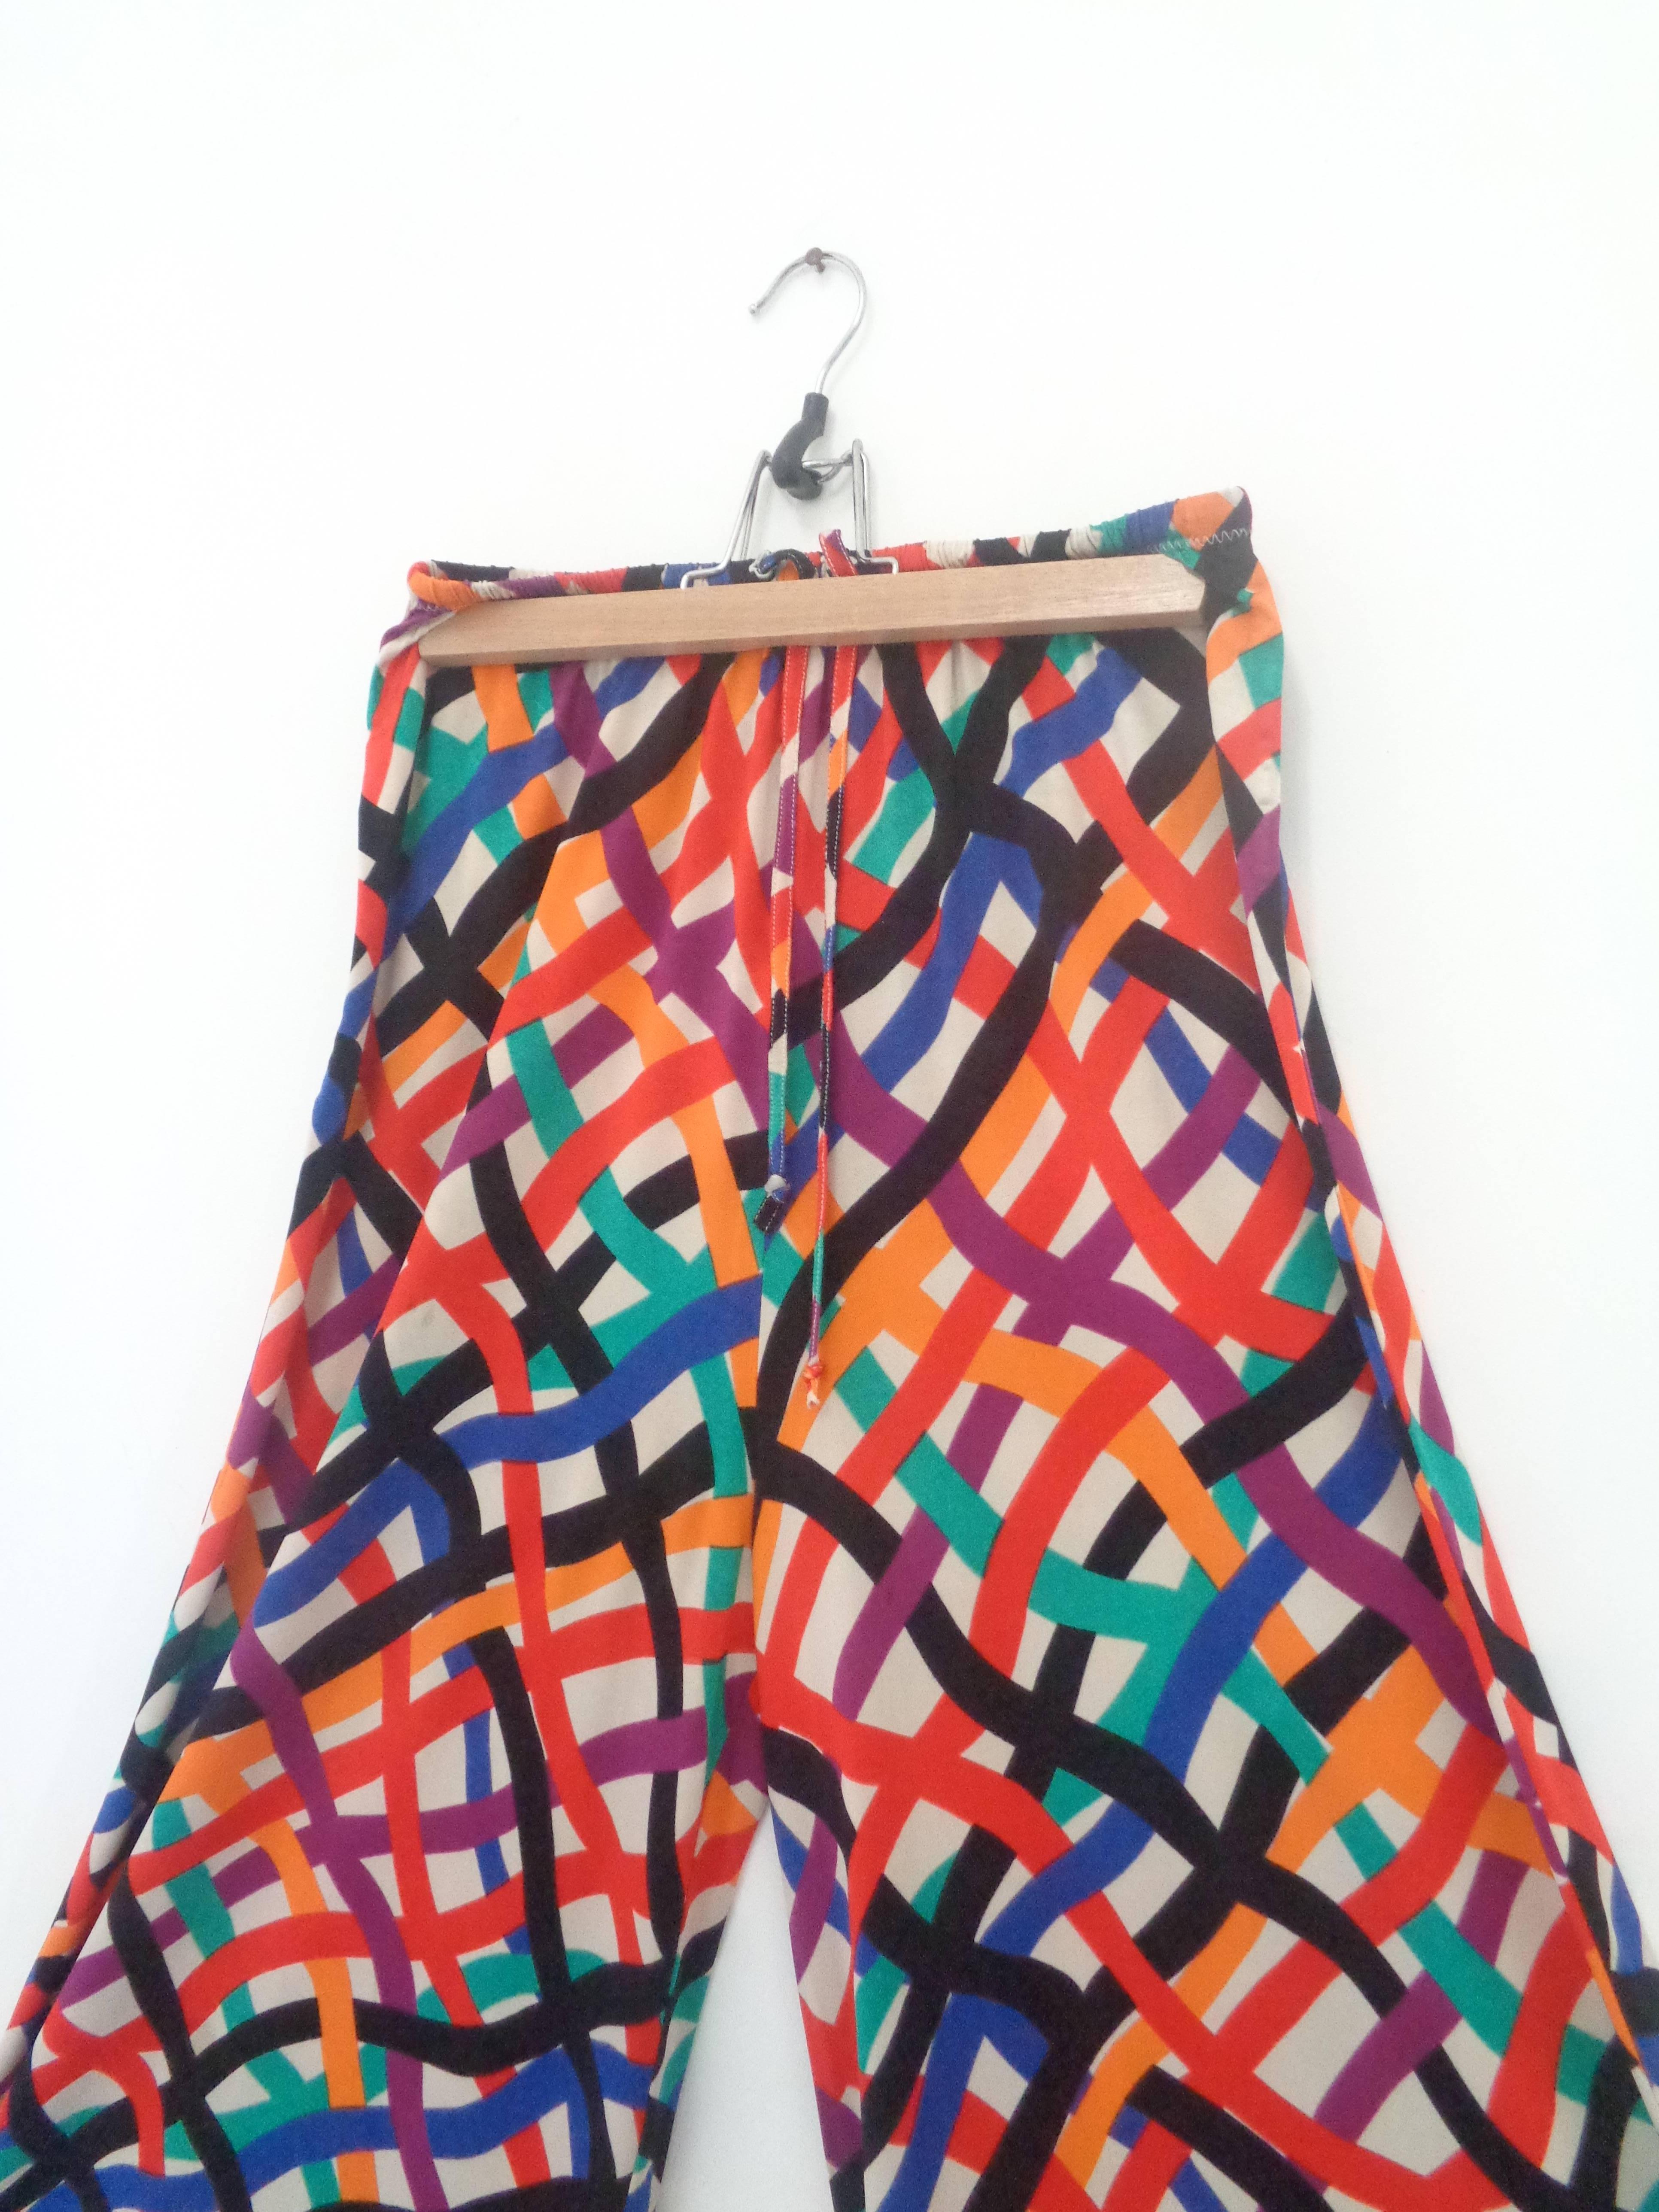 Missoni Mare Beachwear Multicolour Pants

Totally made in italy in size small
Elastic cotton